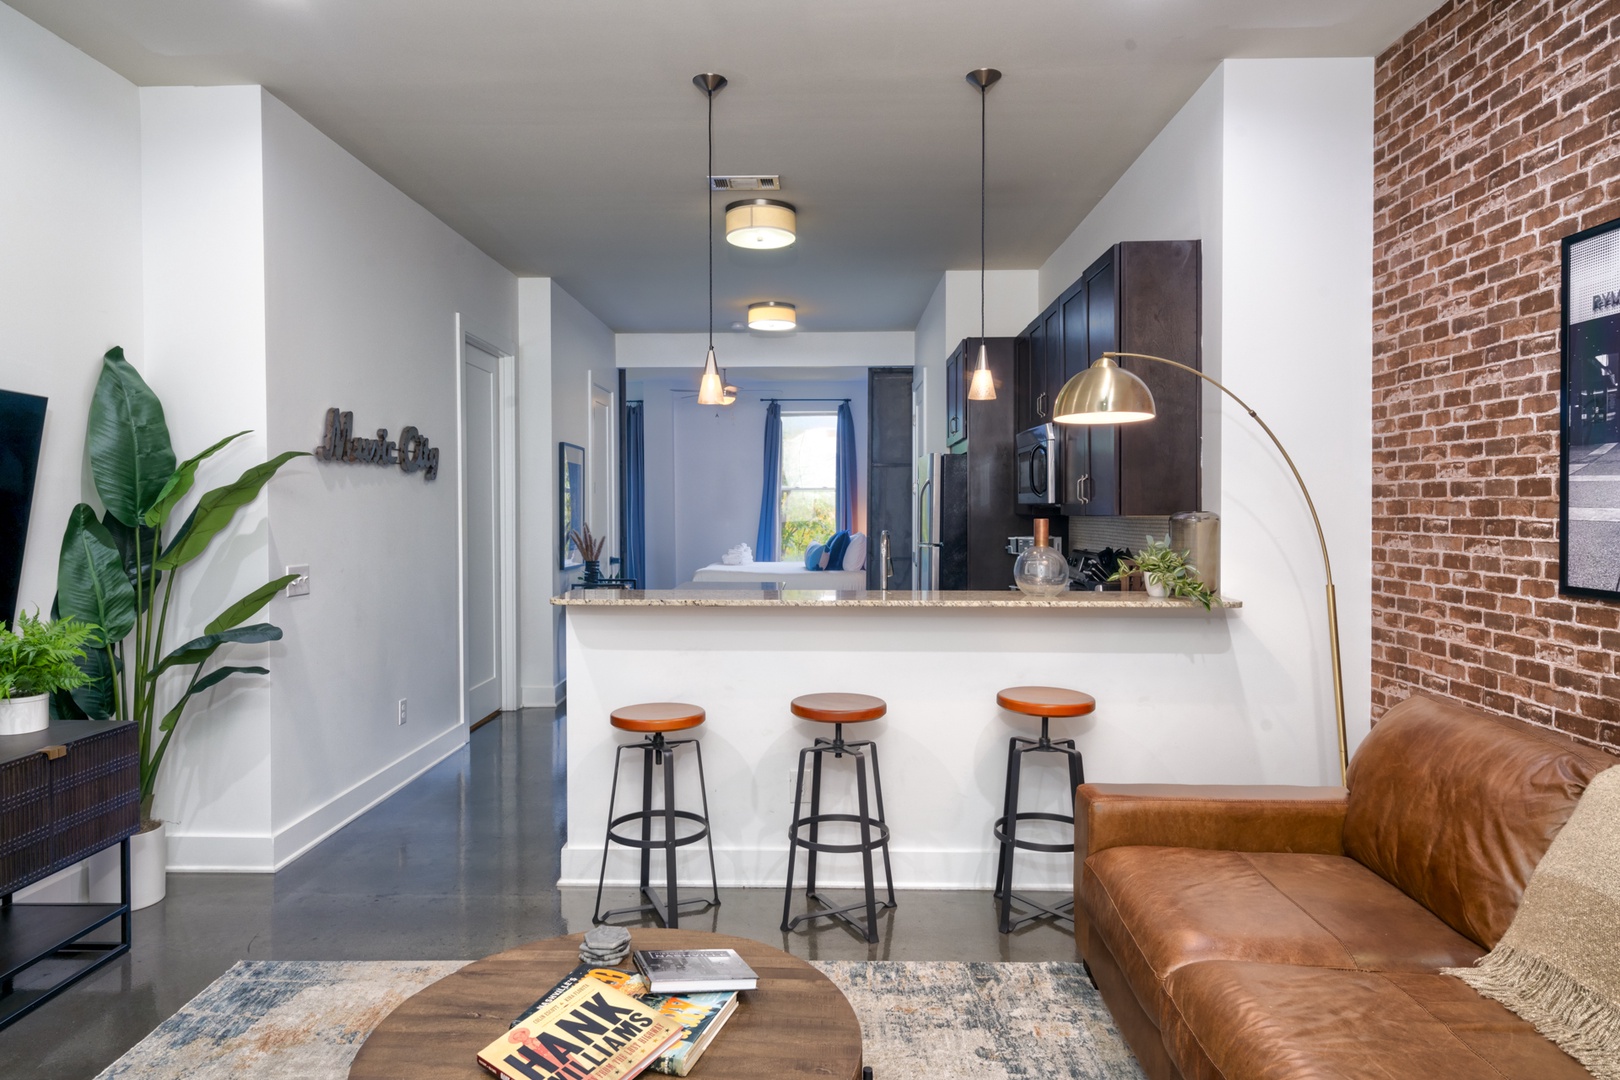 Sip morning coffee or grab a bite at the kitchen counter, with seating for 3